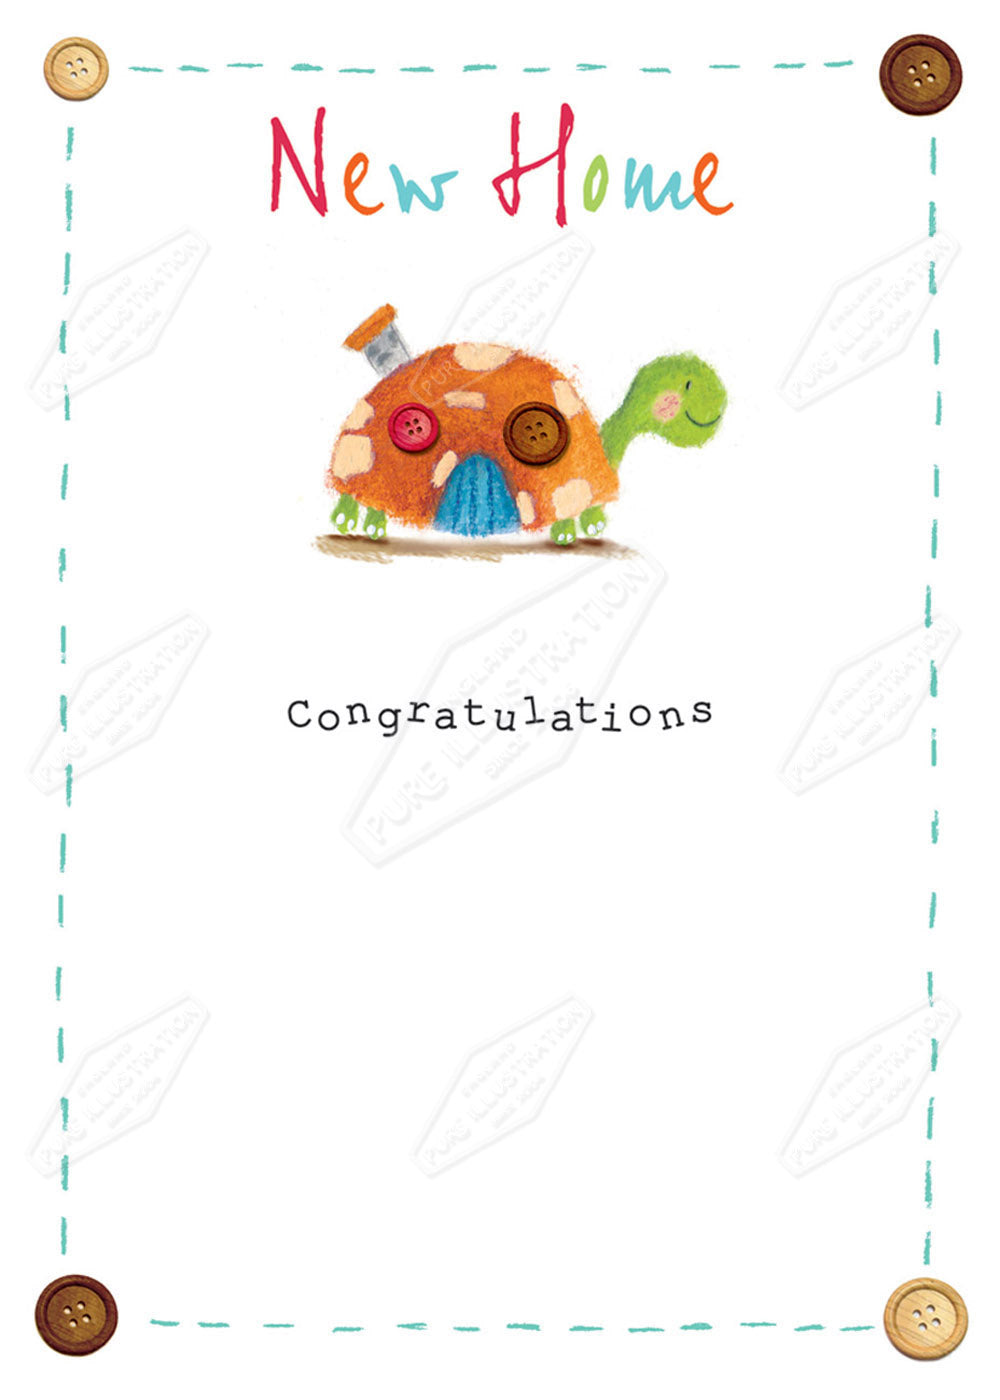 New Home Tortoise Greeting Card Design by Cory Reid for Pure Art Licensing Agency & Surface Design Studio